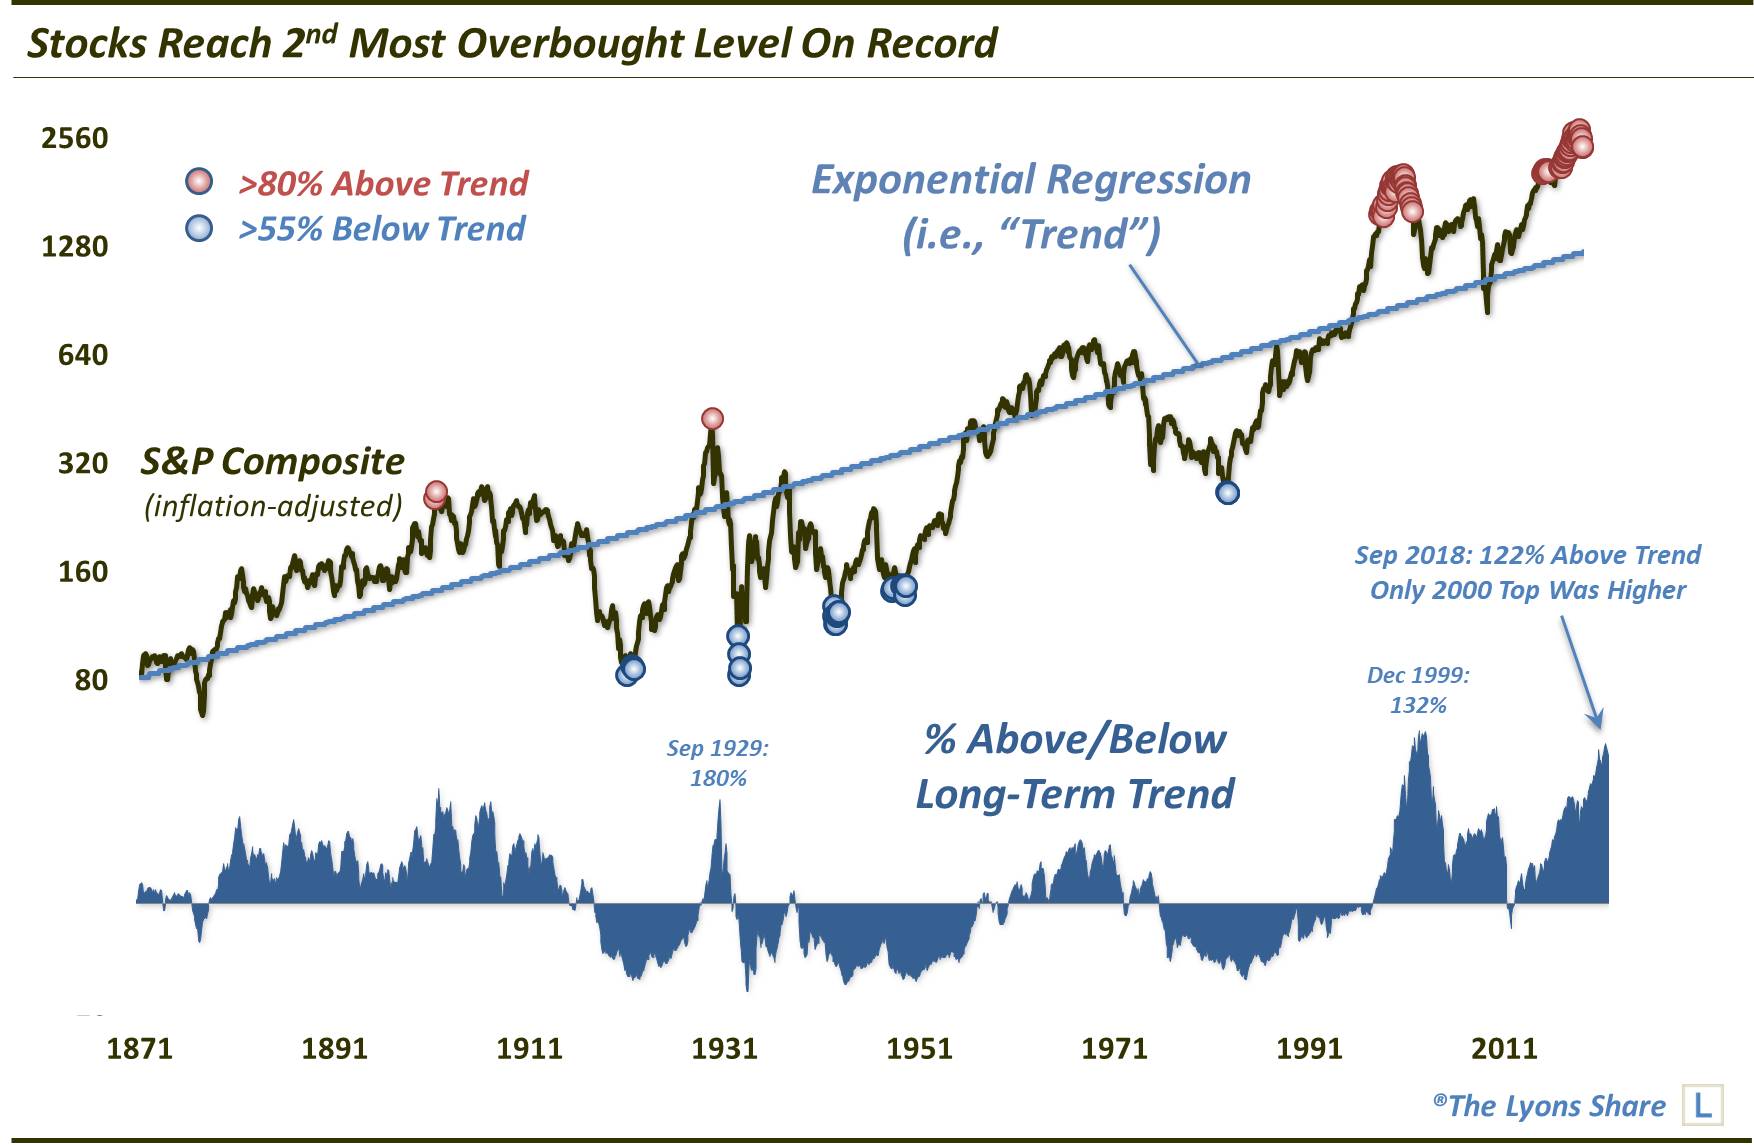 Overbought means